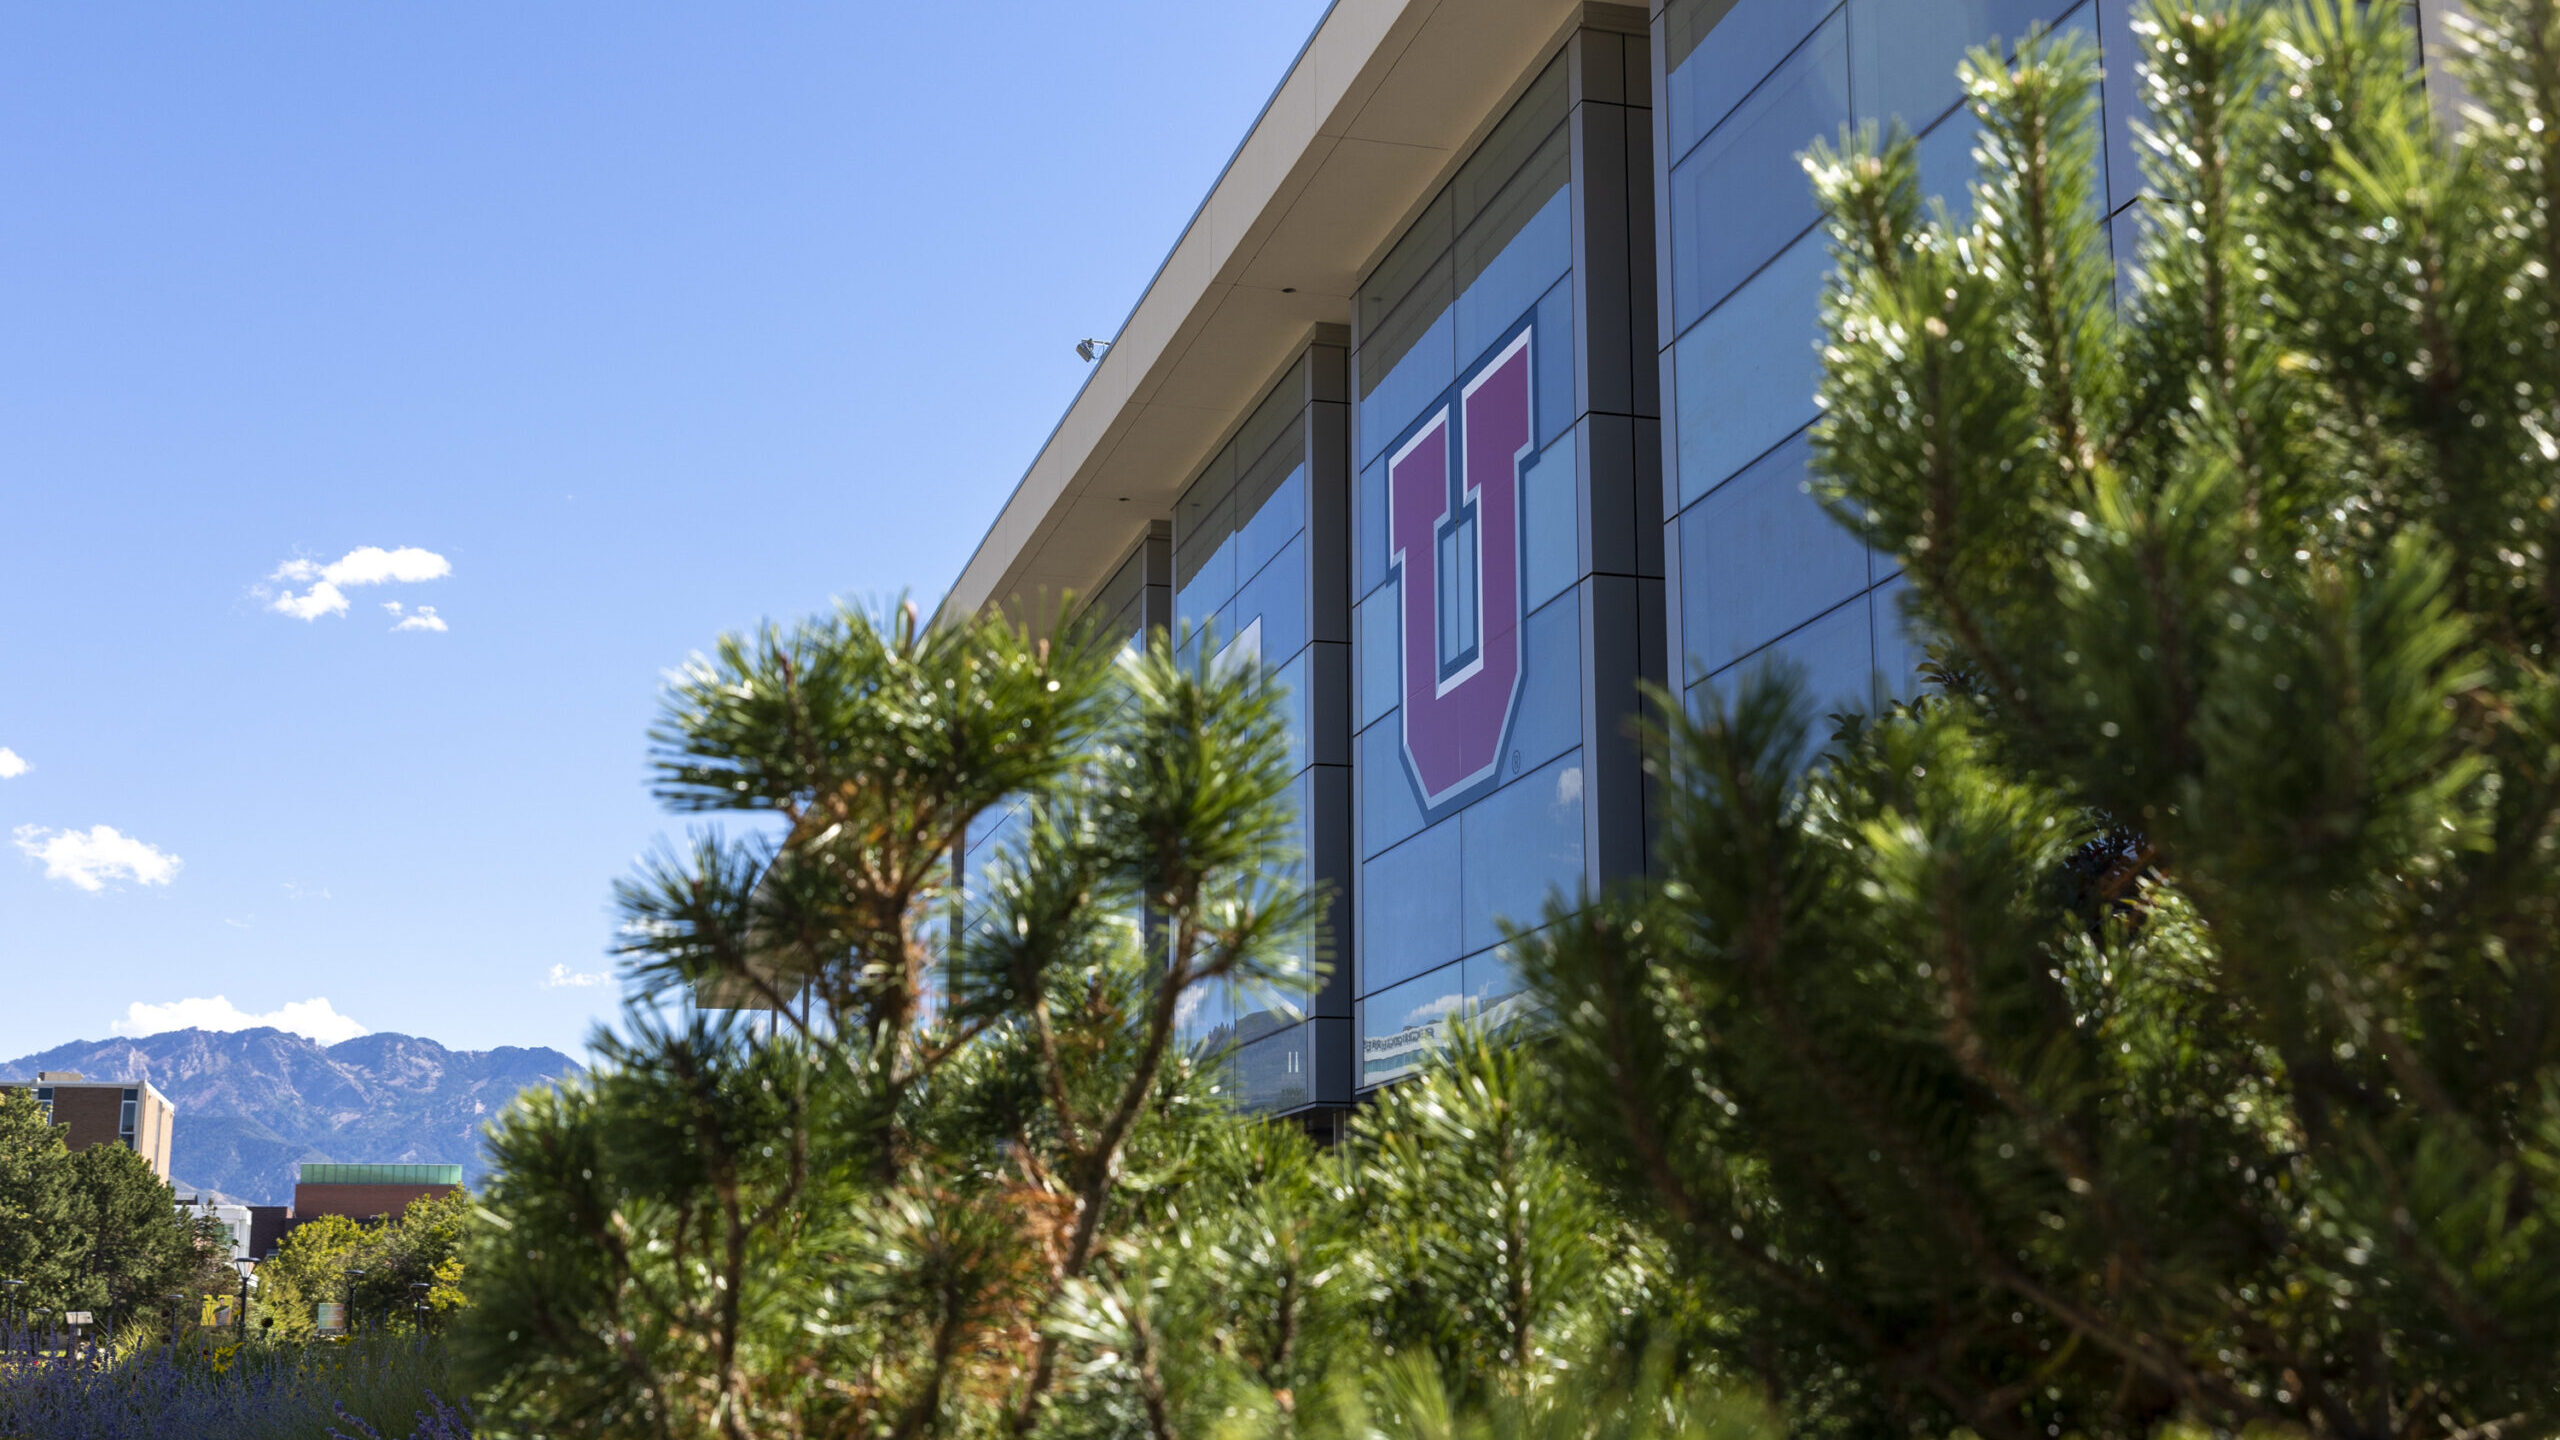 The block U appears on the front of the J. Willard Marriott Library on the University of Utah campu...